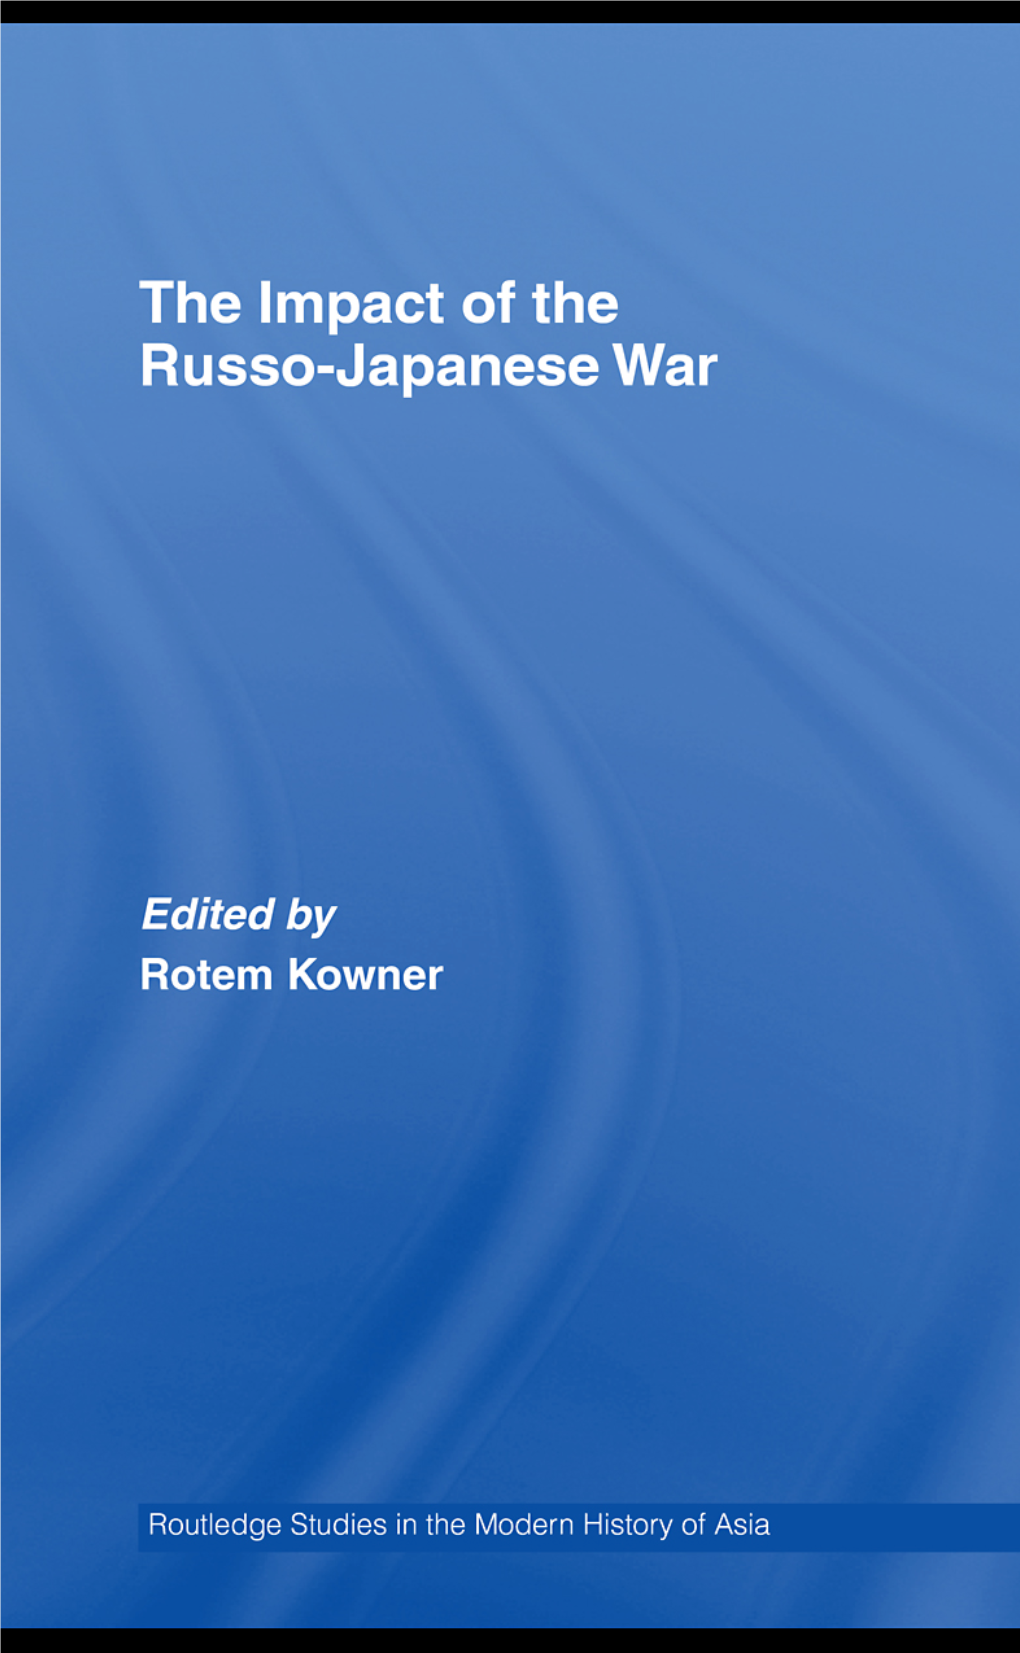 The Impact of the Russo-Japanese War